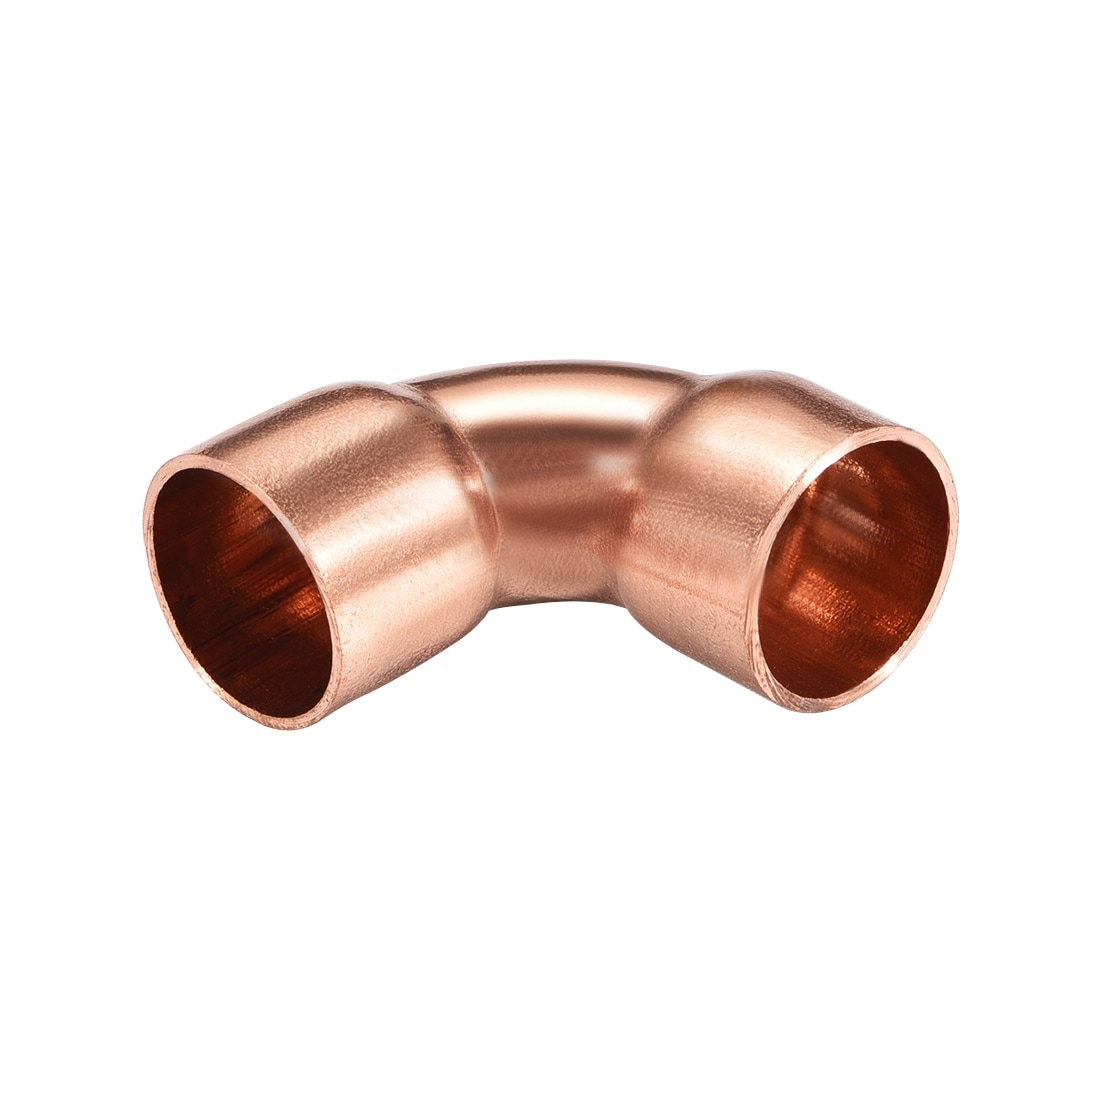 3/4-inch ID 90 Degree Copper Elbow Short-Turn Copper Fitting for Plumbing 2pcs